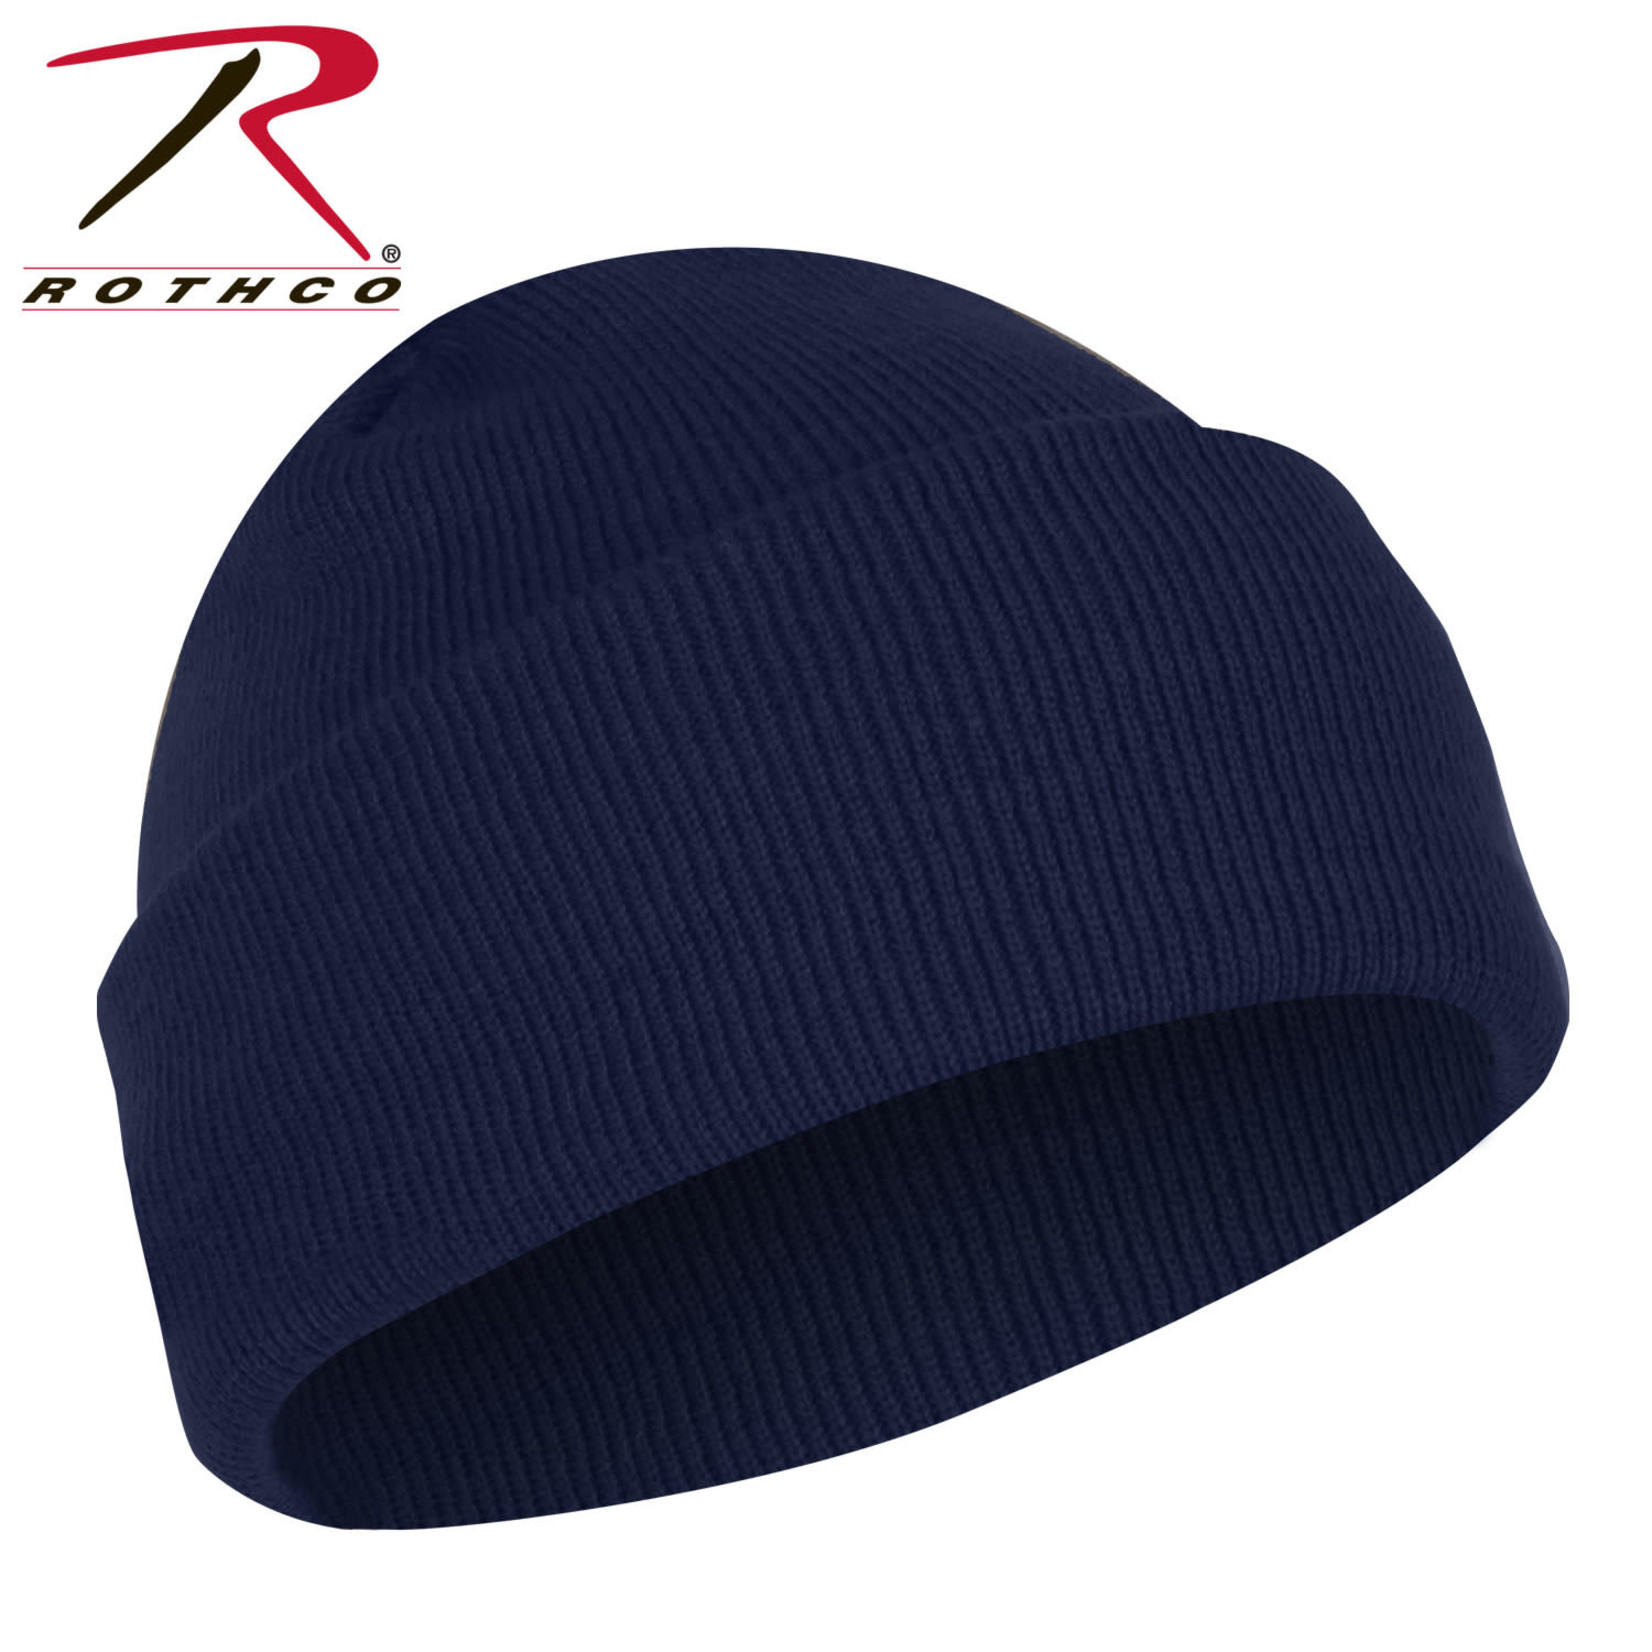 Rothco Rothco Deluxe Fine Knit Solid Color Watch Cap